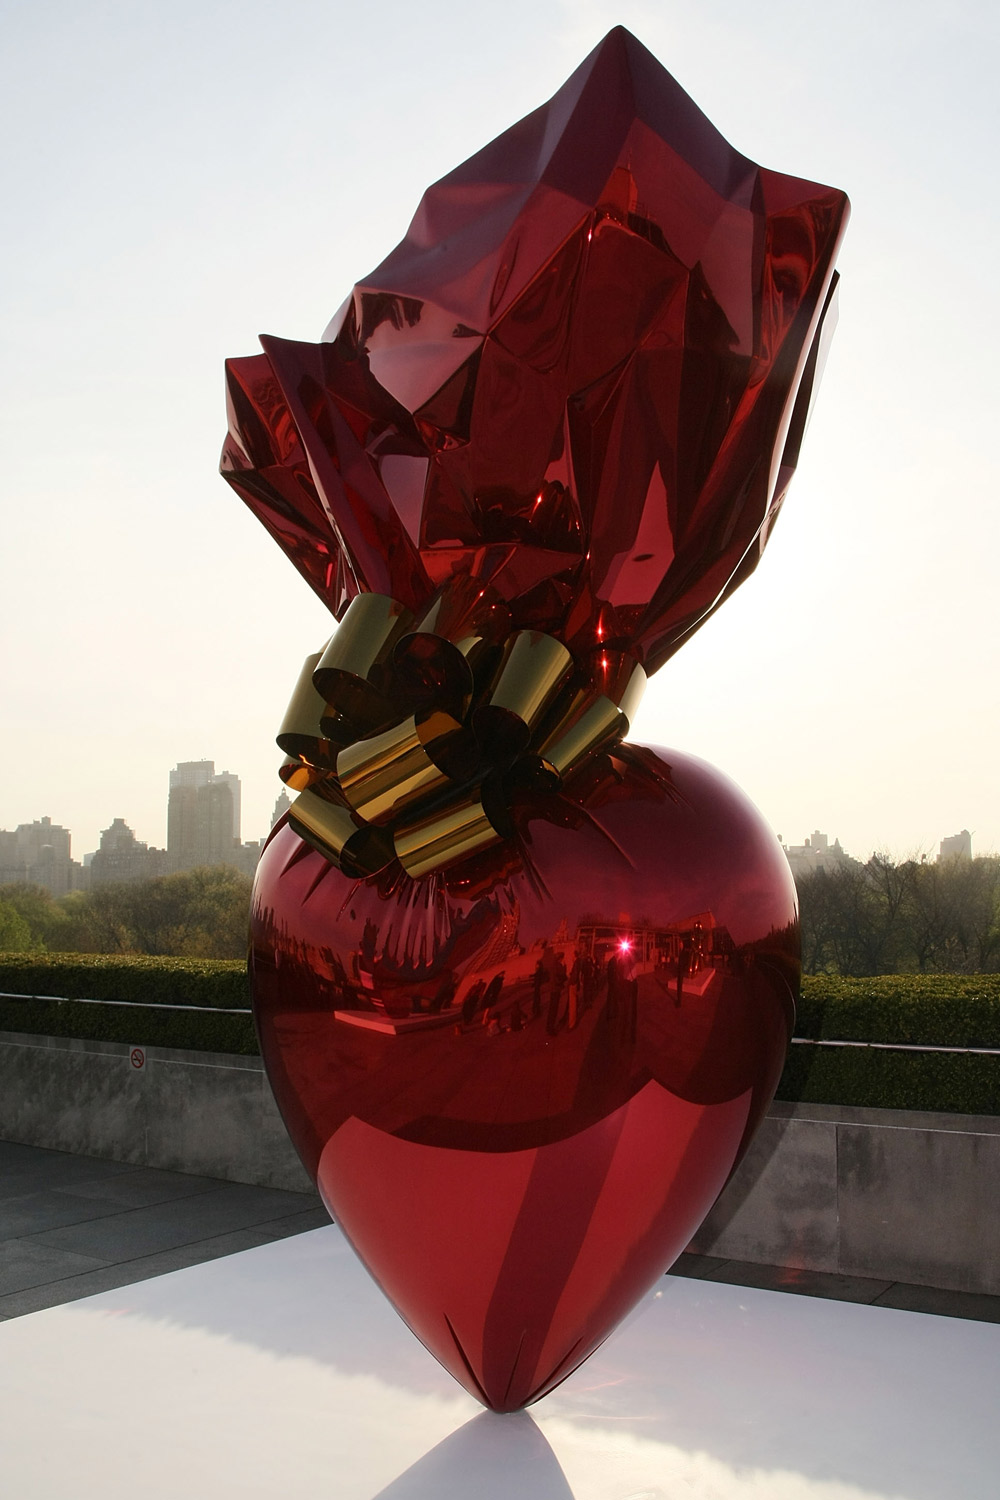 Jeff Koons' $58.4M Orange Balloon Dog and 10 Other Cool Balloon Pieces ...